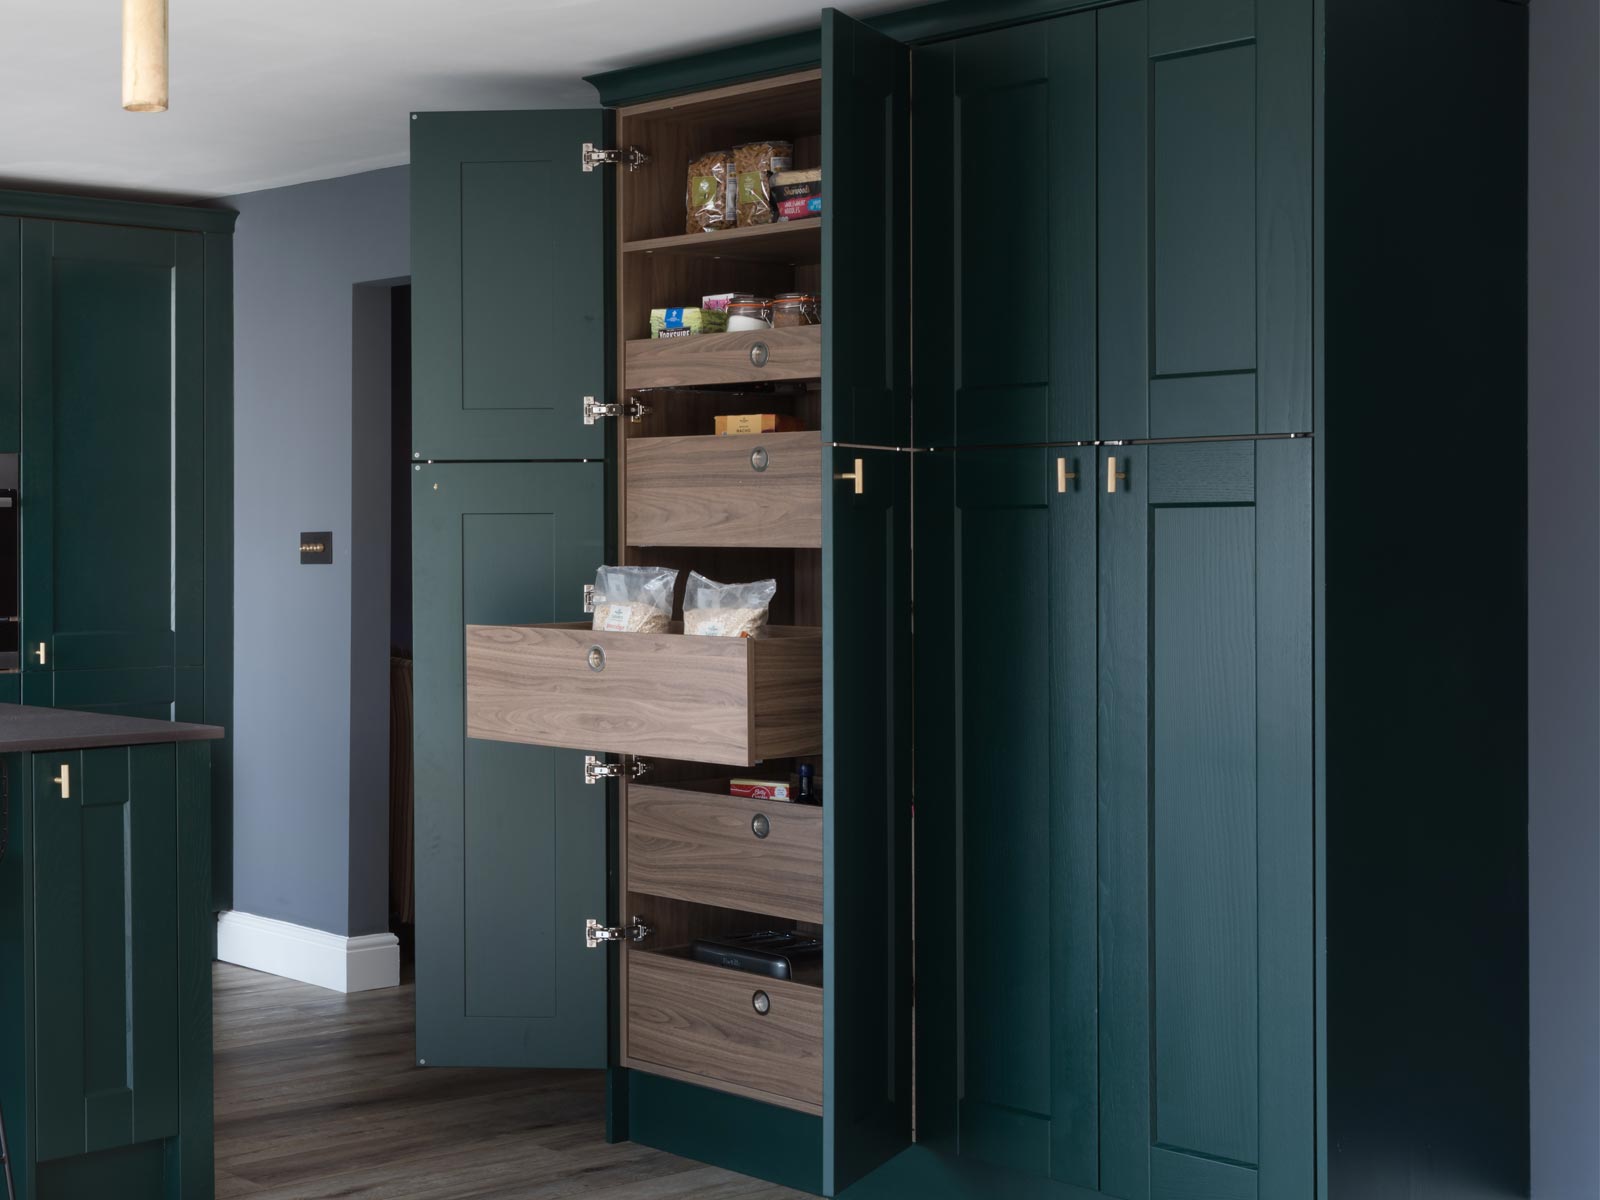 A kitchen storage cabinet with pull-out cabinet kitchen drawers